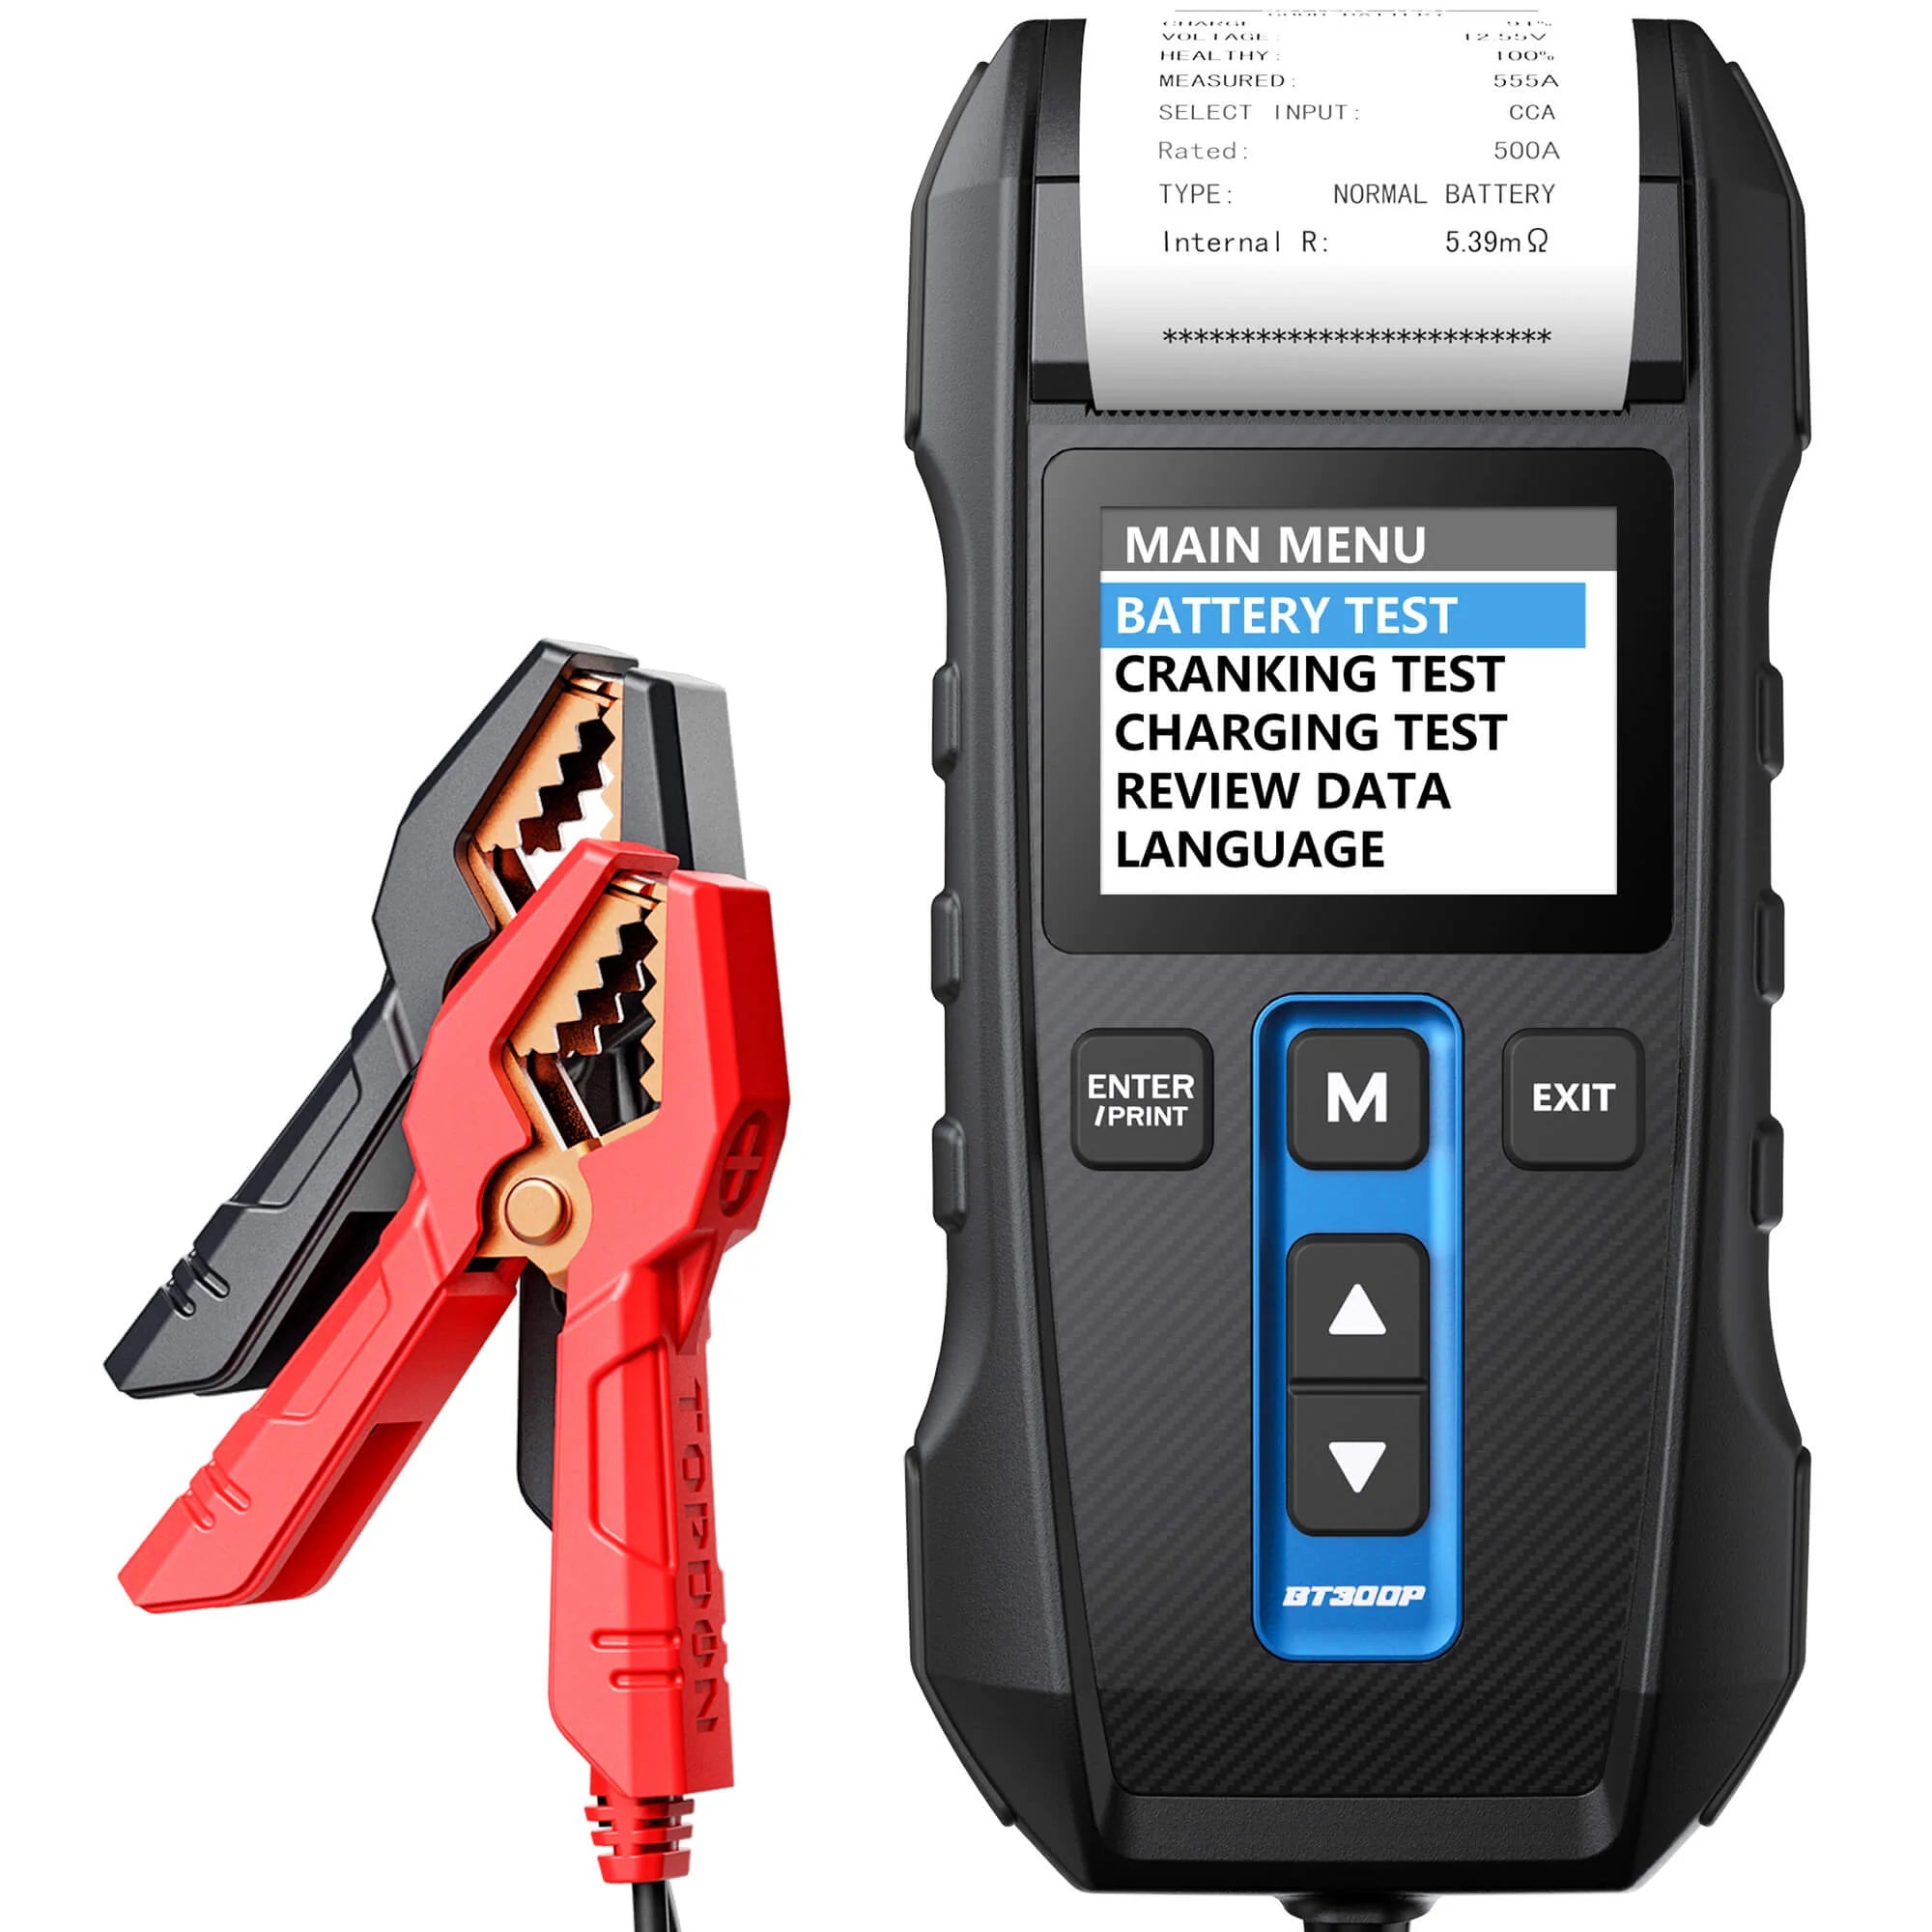 TOPDON BT300P Battery Tester with Printer